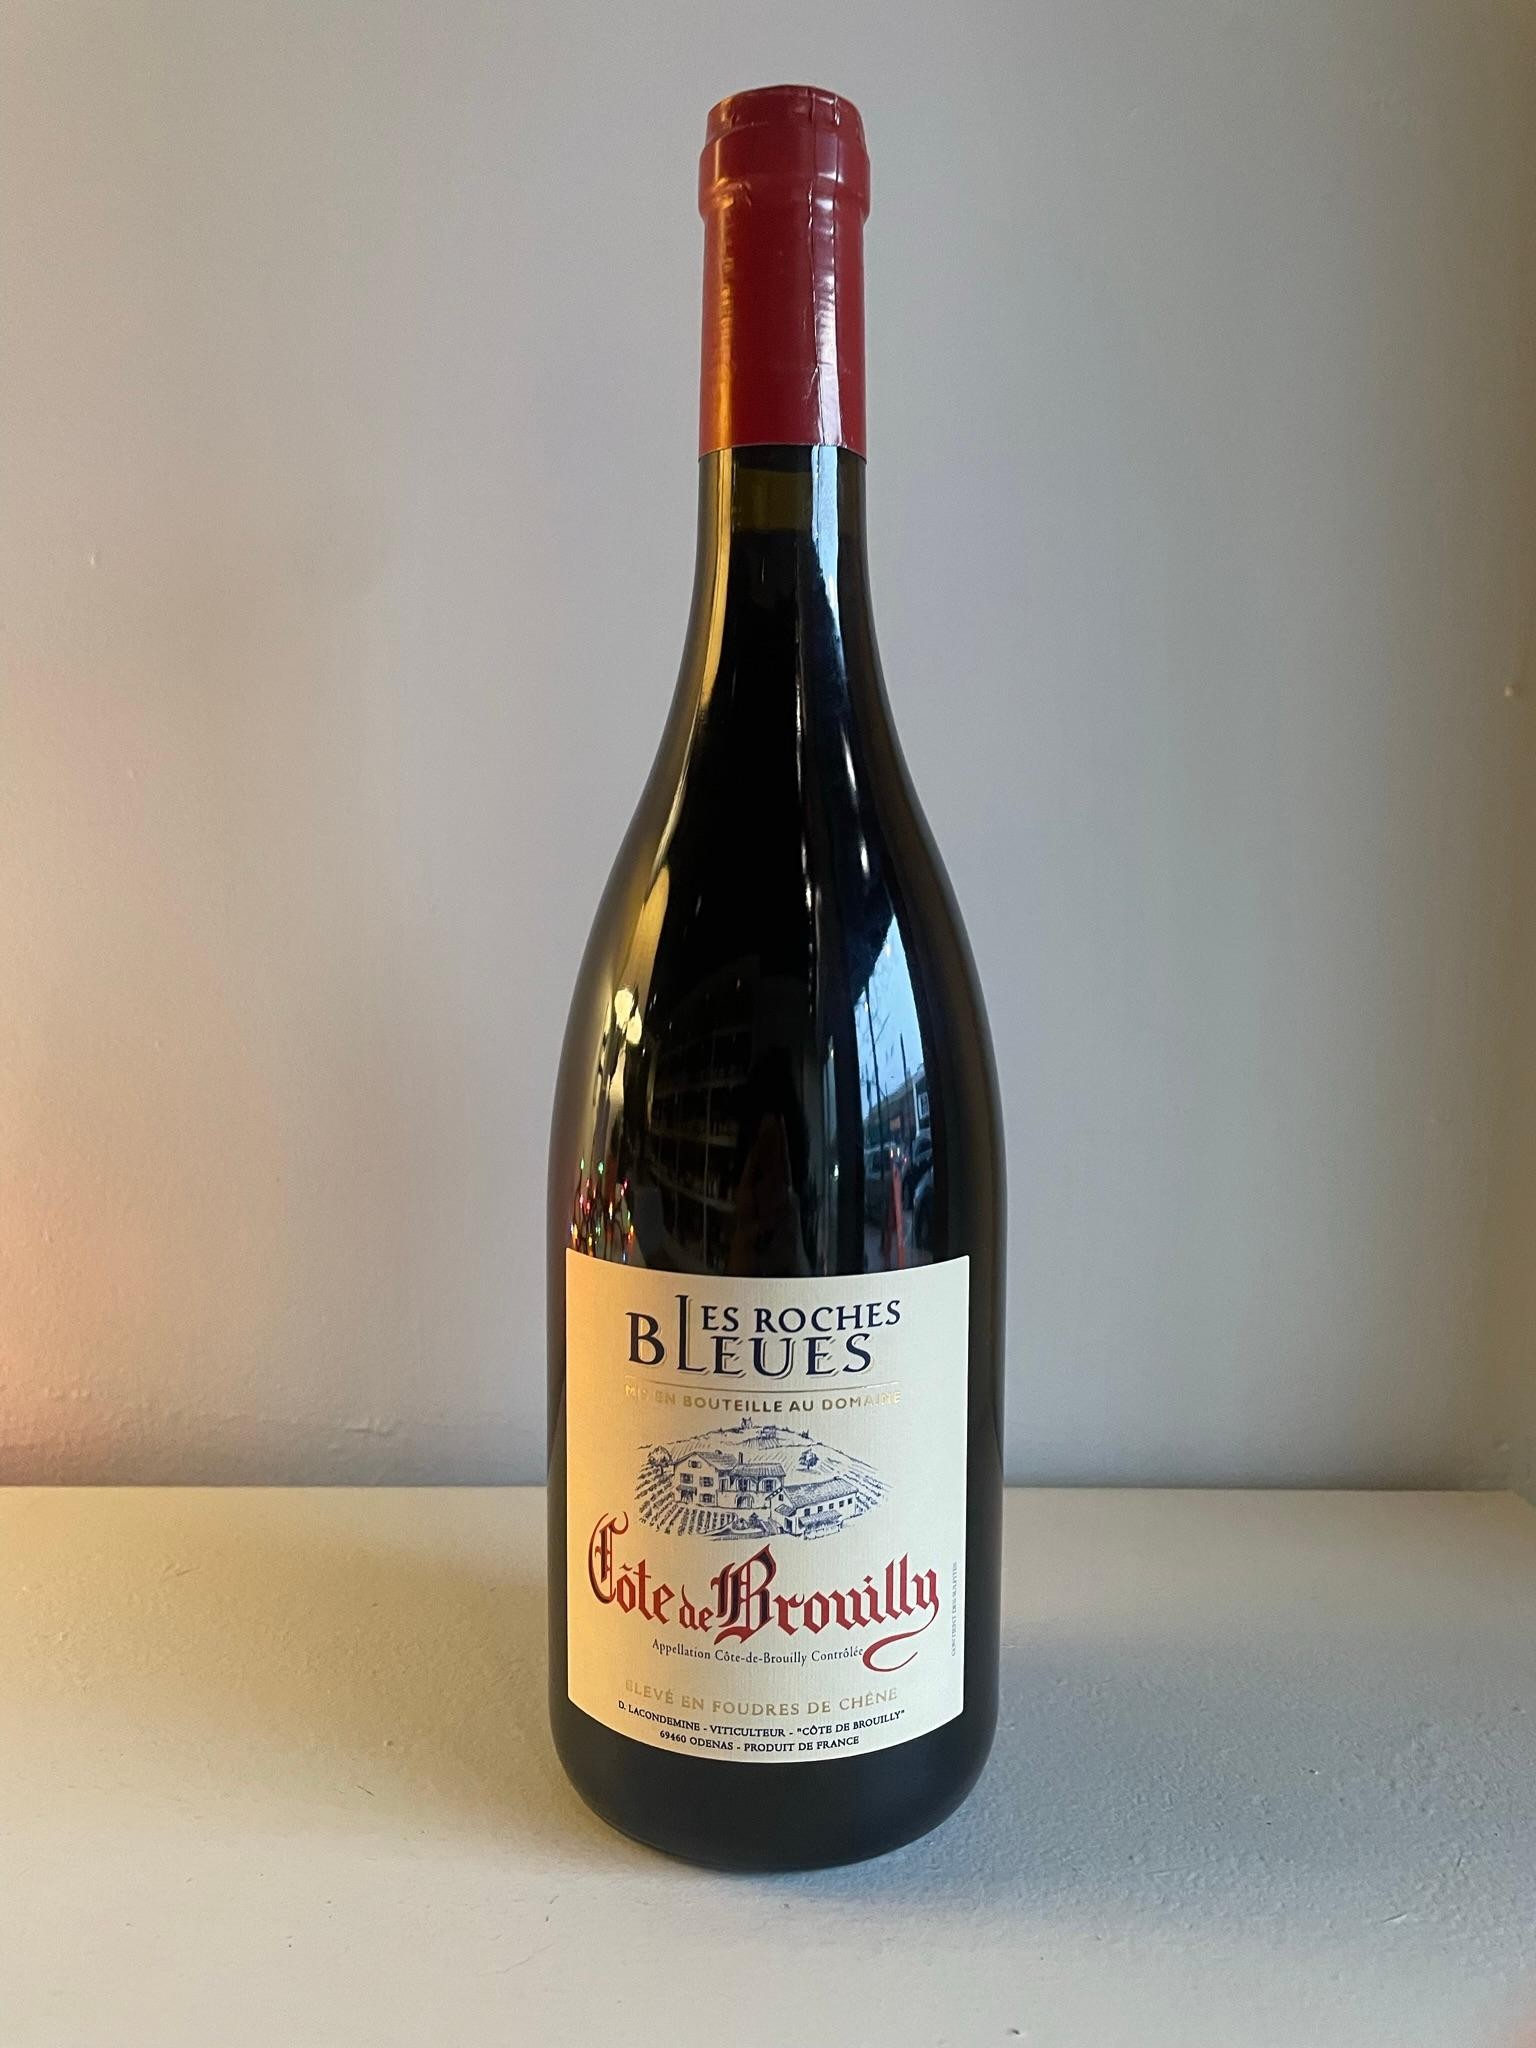 2019 Gamay, Les Roches Bleues, Cote de Brouilly